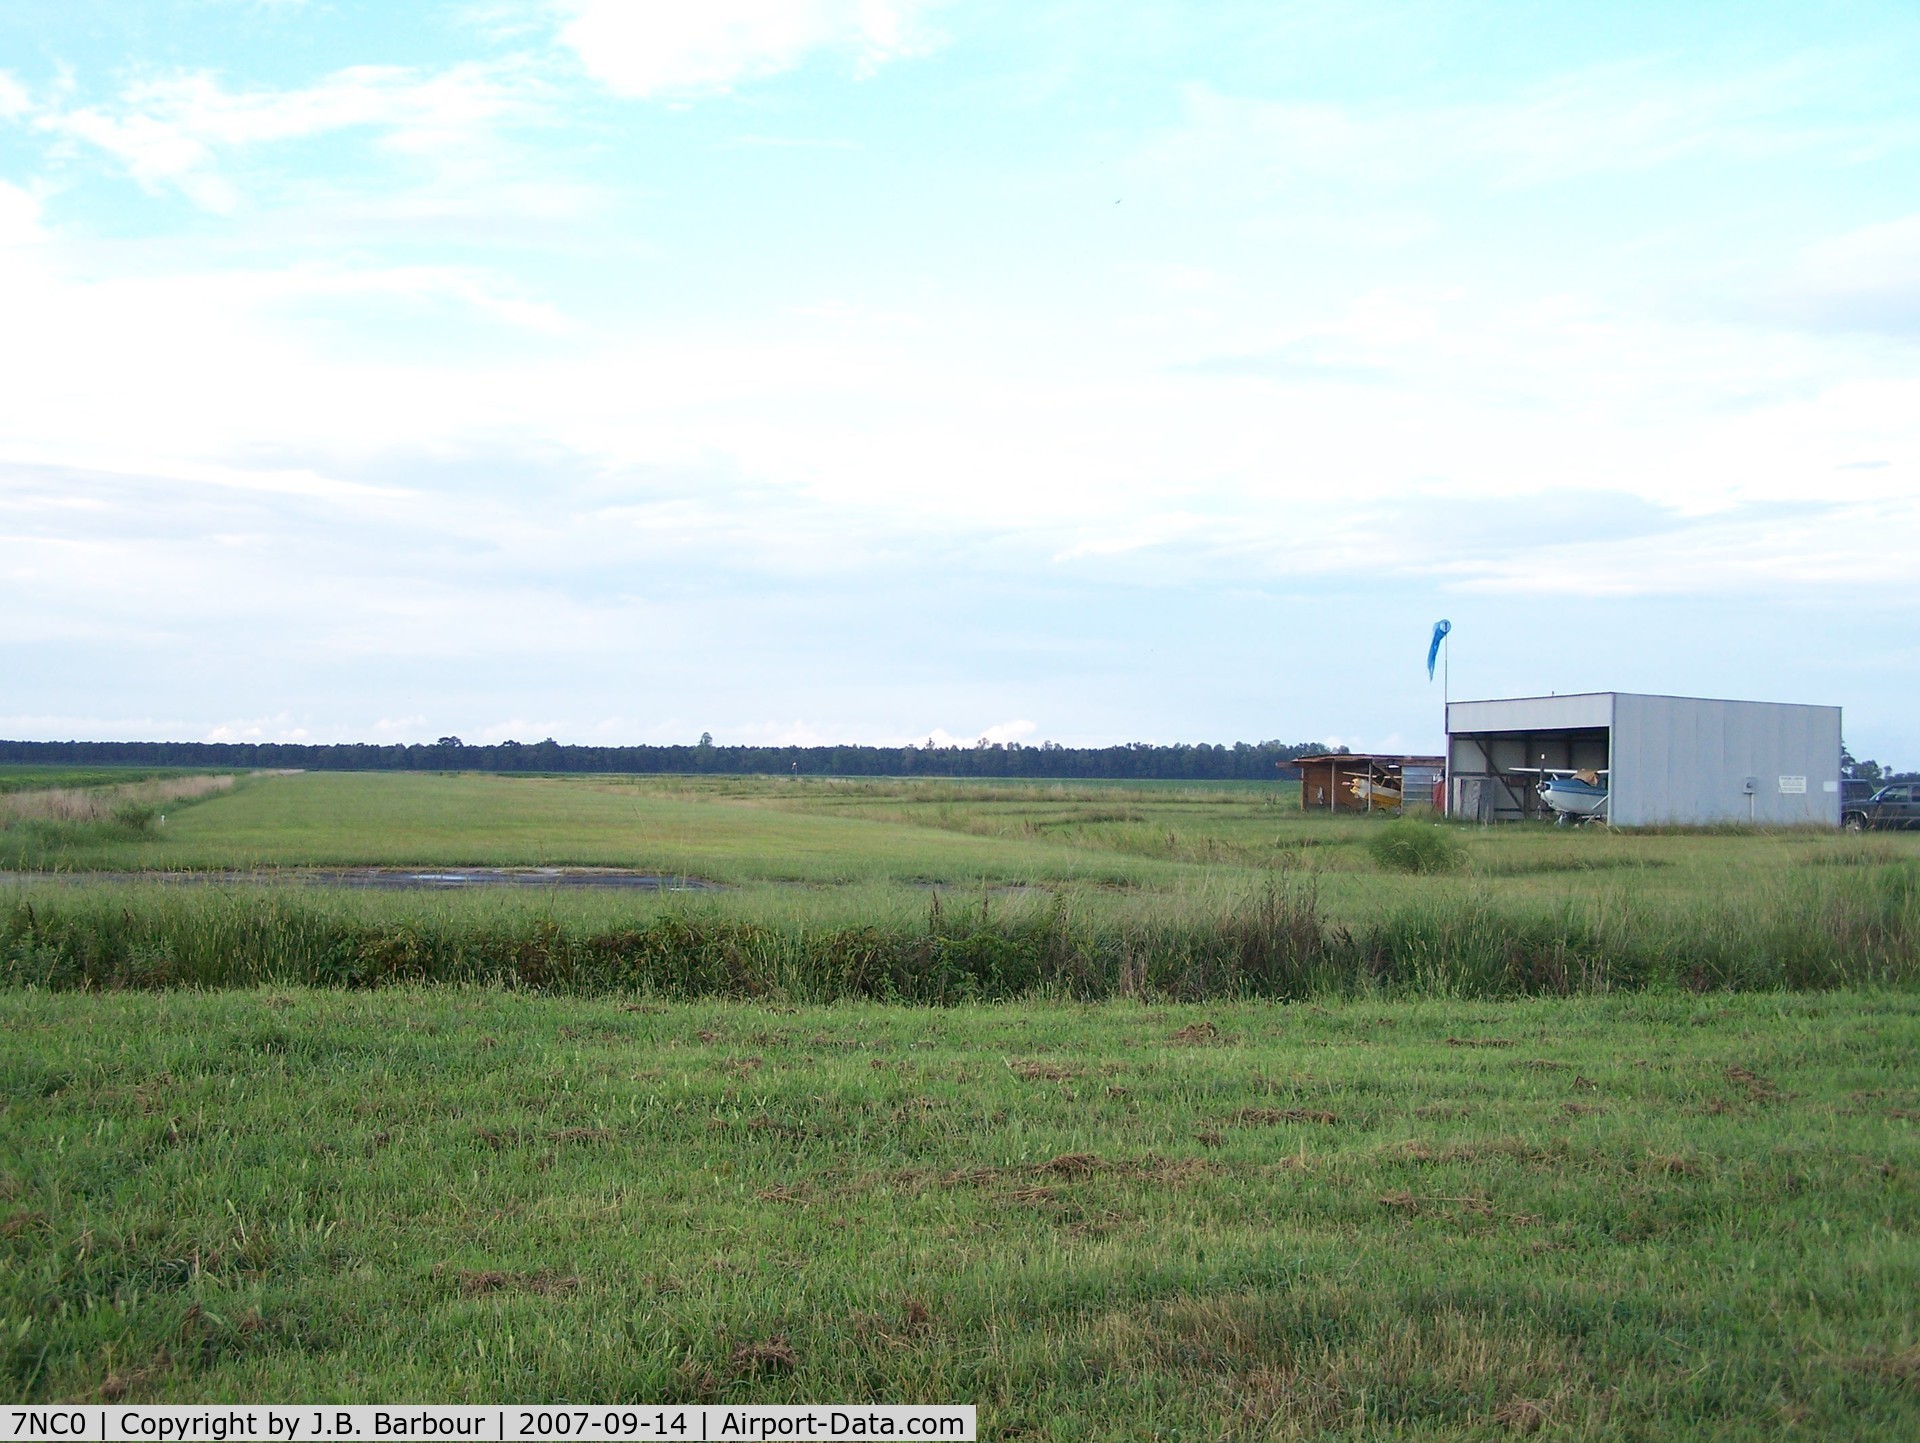 Pamlico Airport (7NC0) - A country airfield